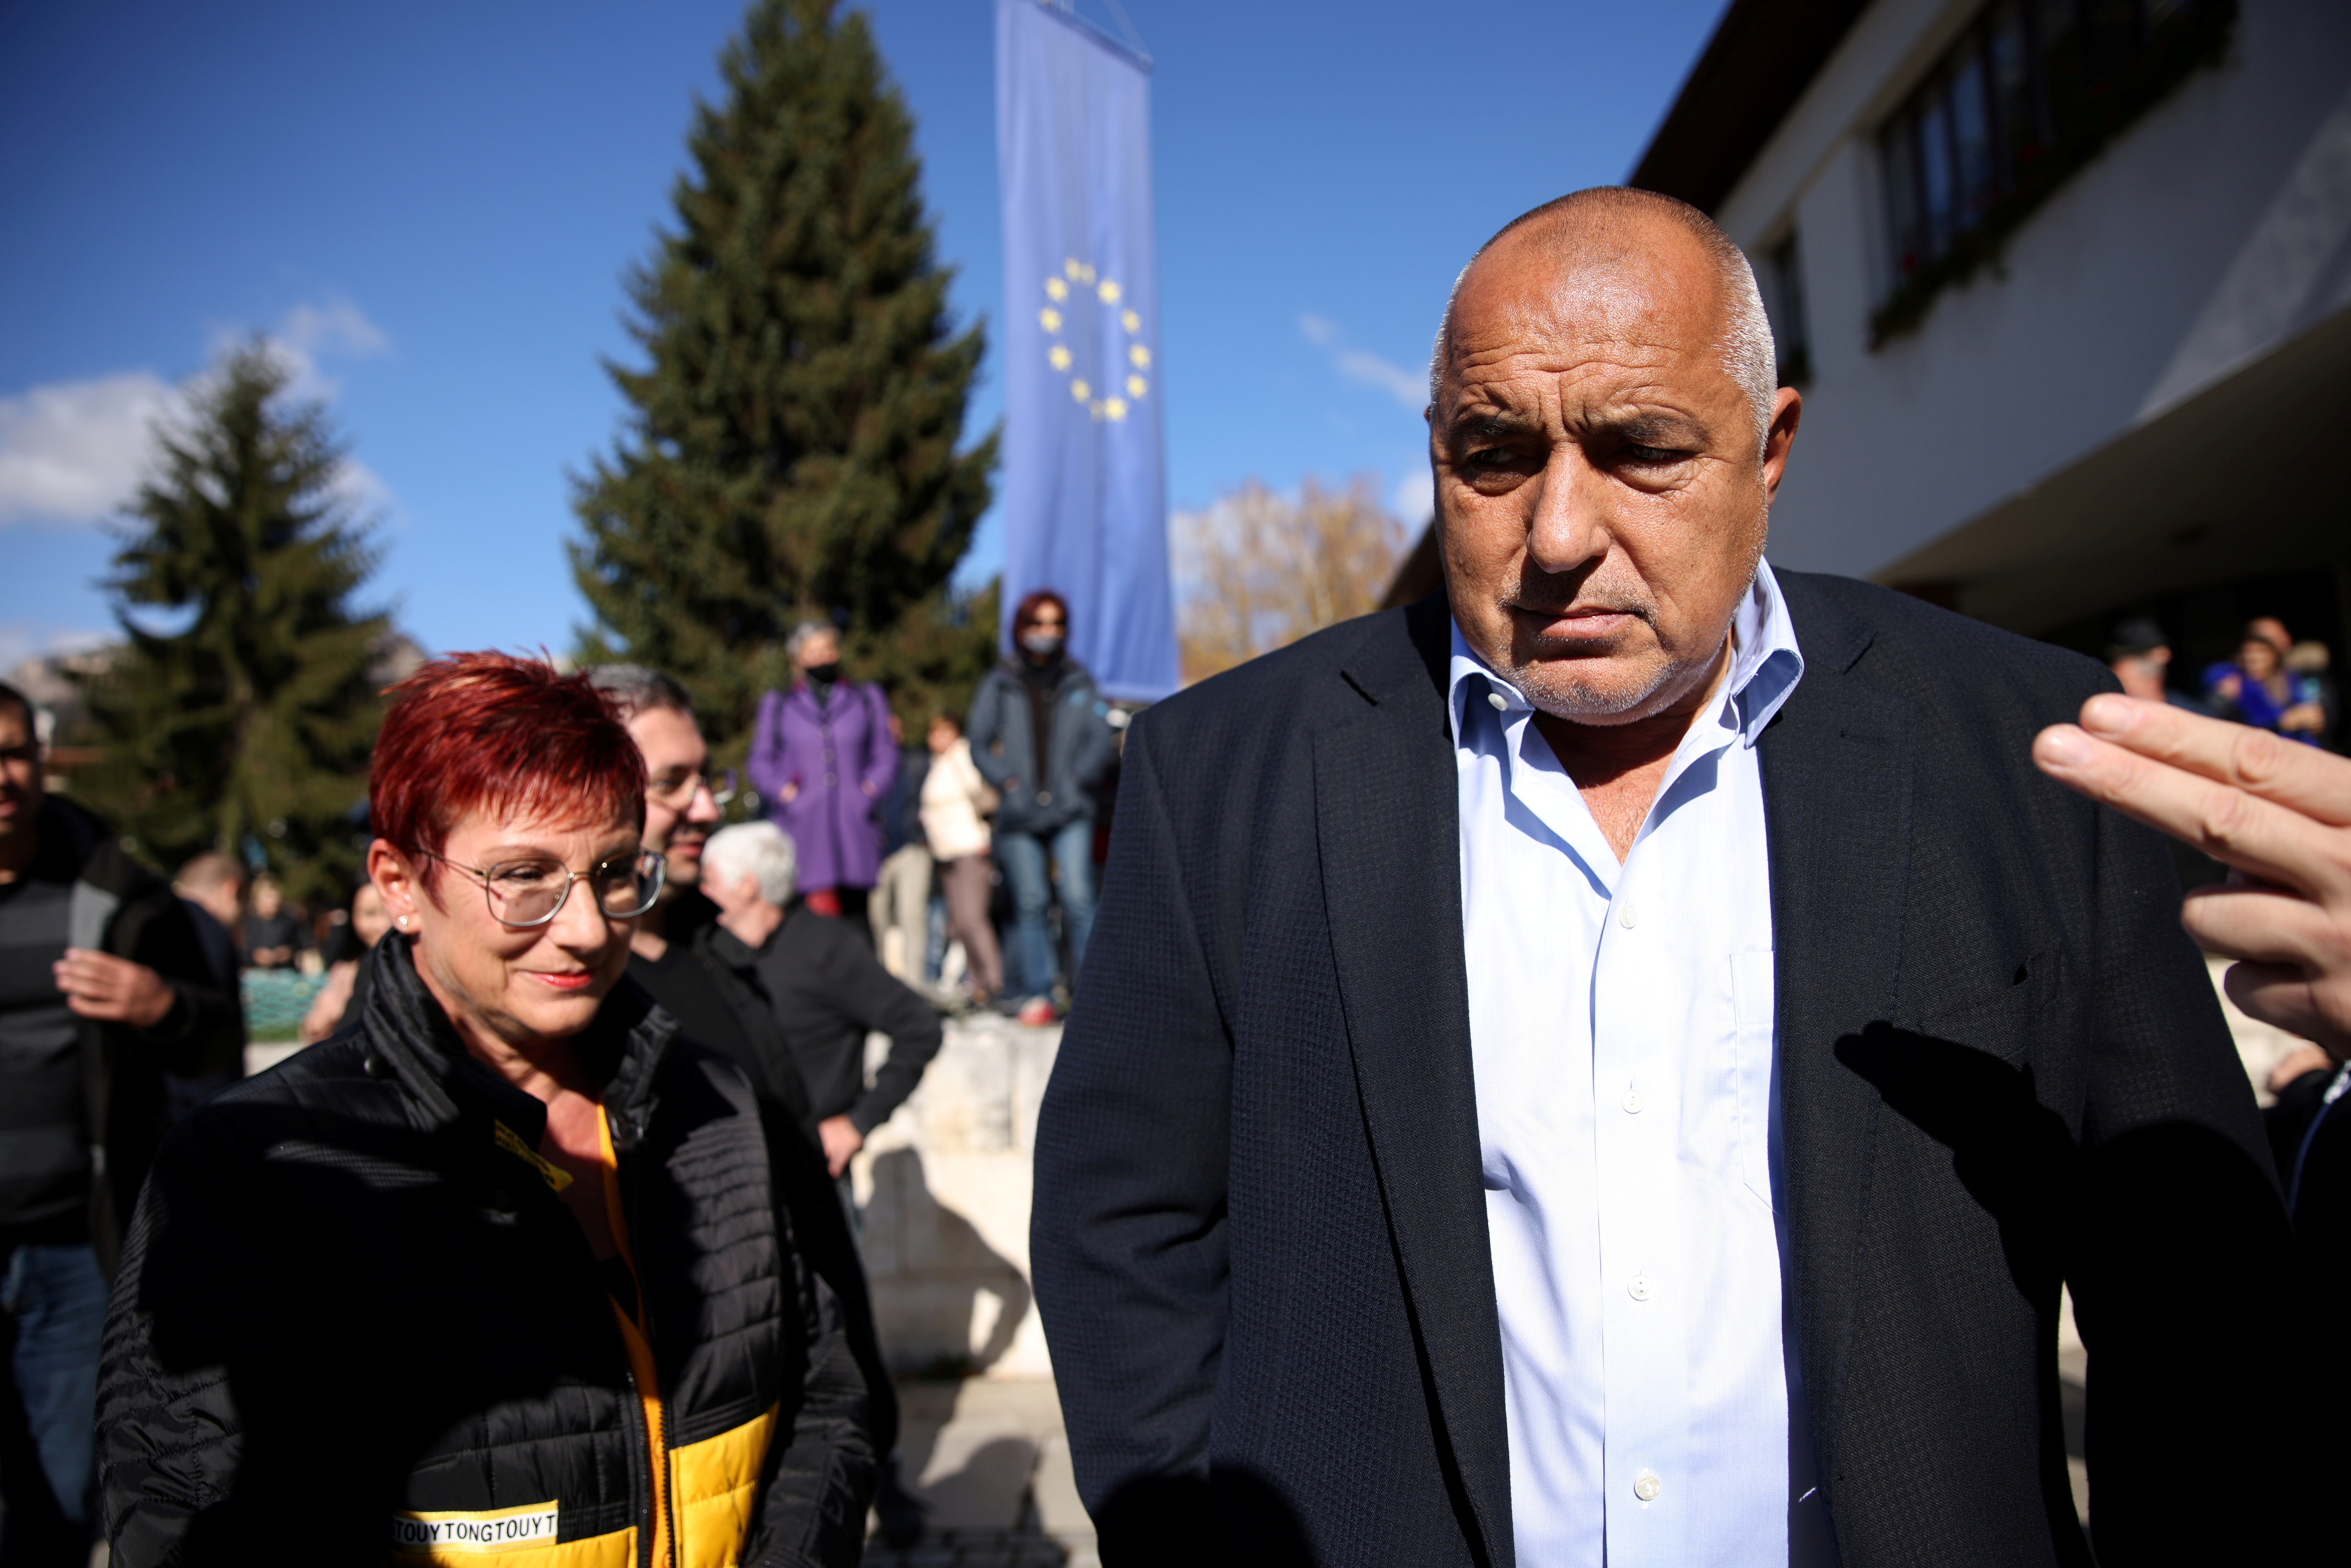 Boyko Borissov, former Bulgarian PM and leader of centre-right GERB party, meets supporters in Teteven